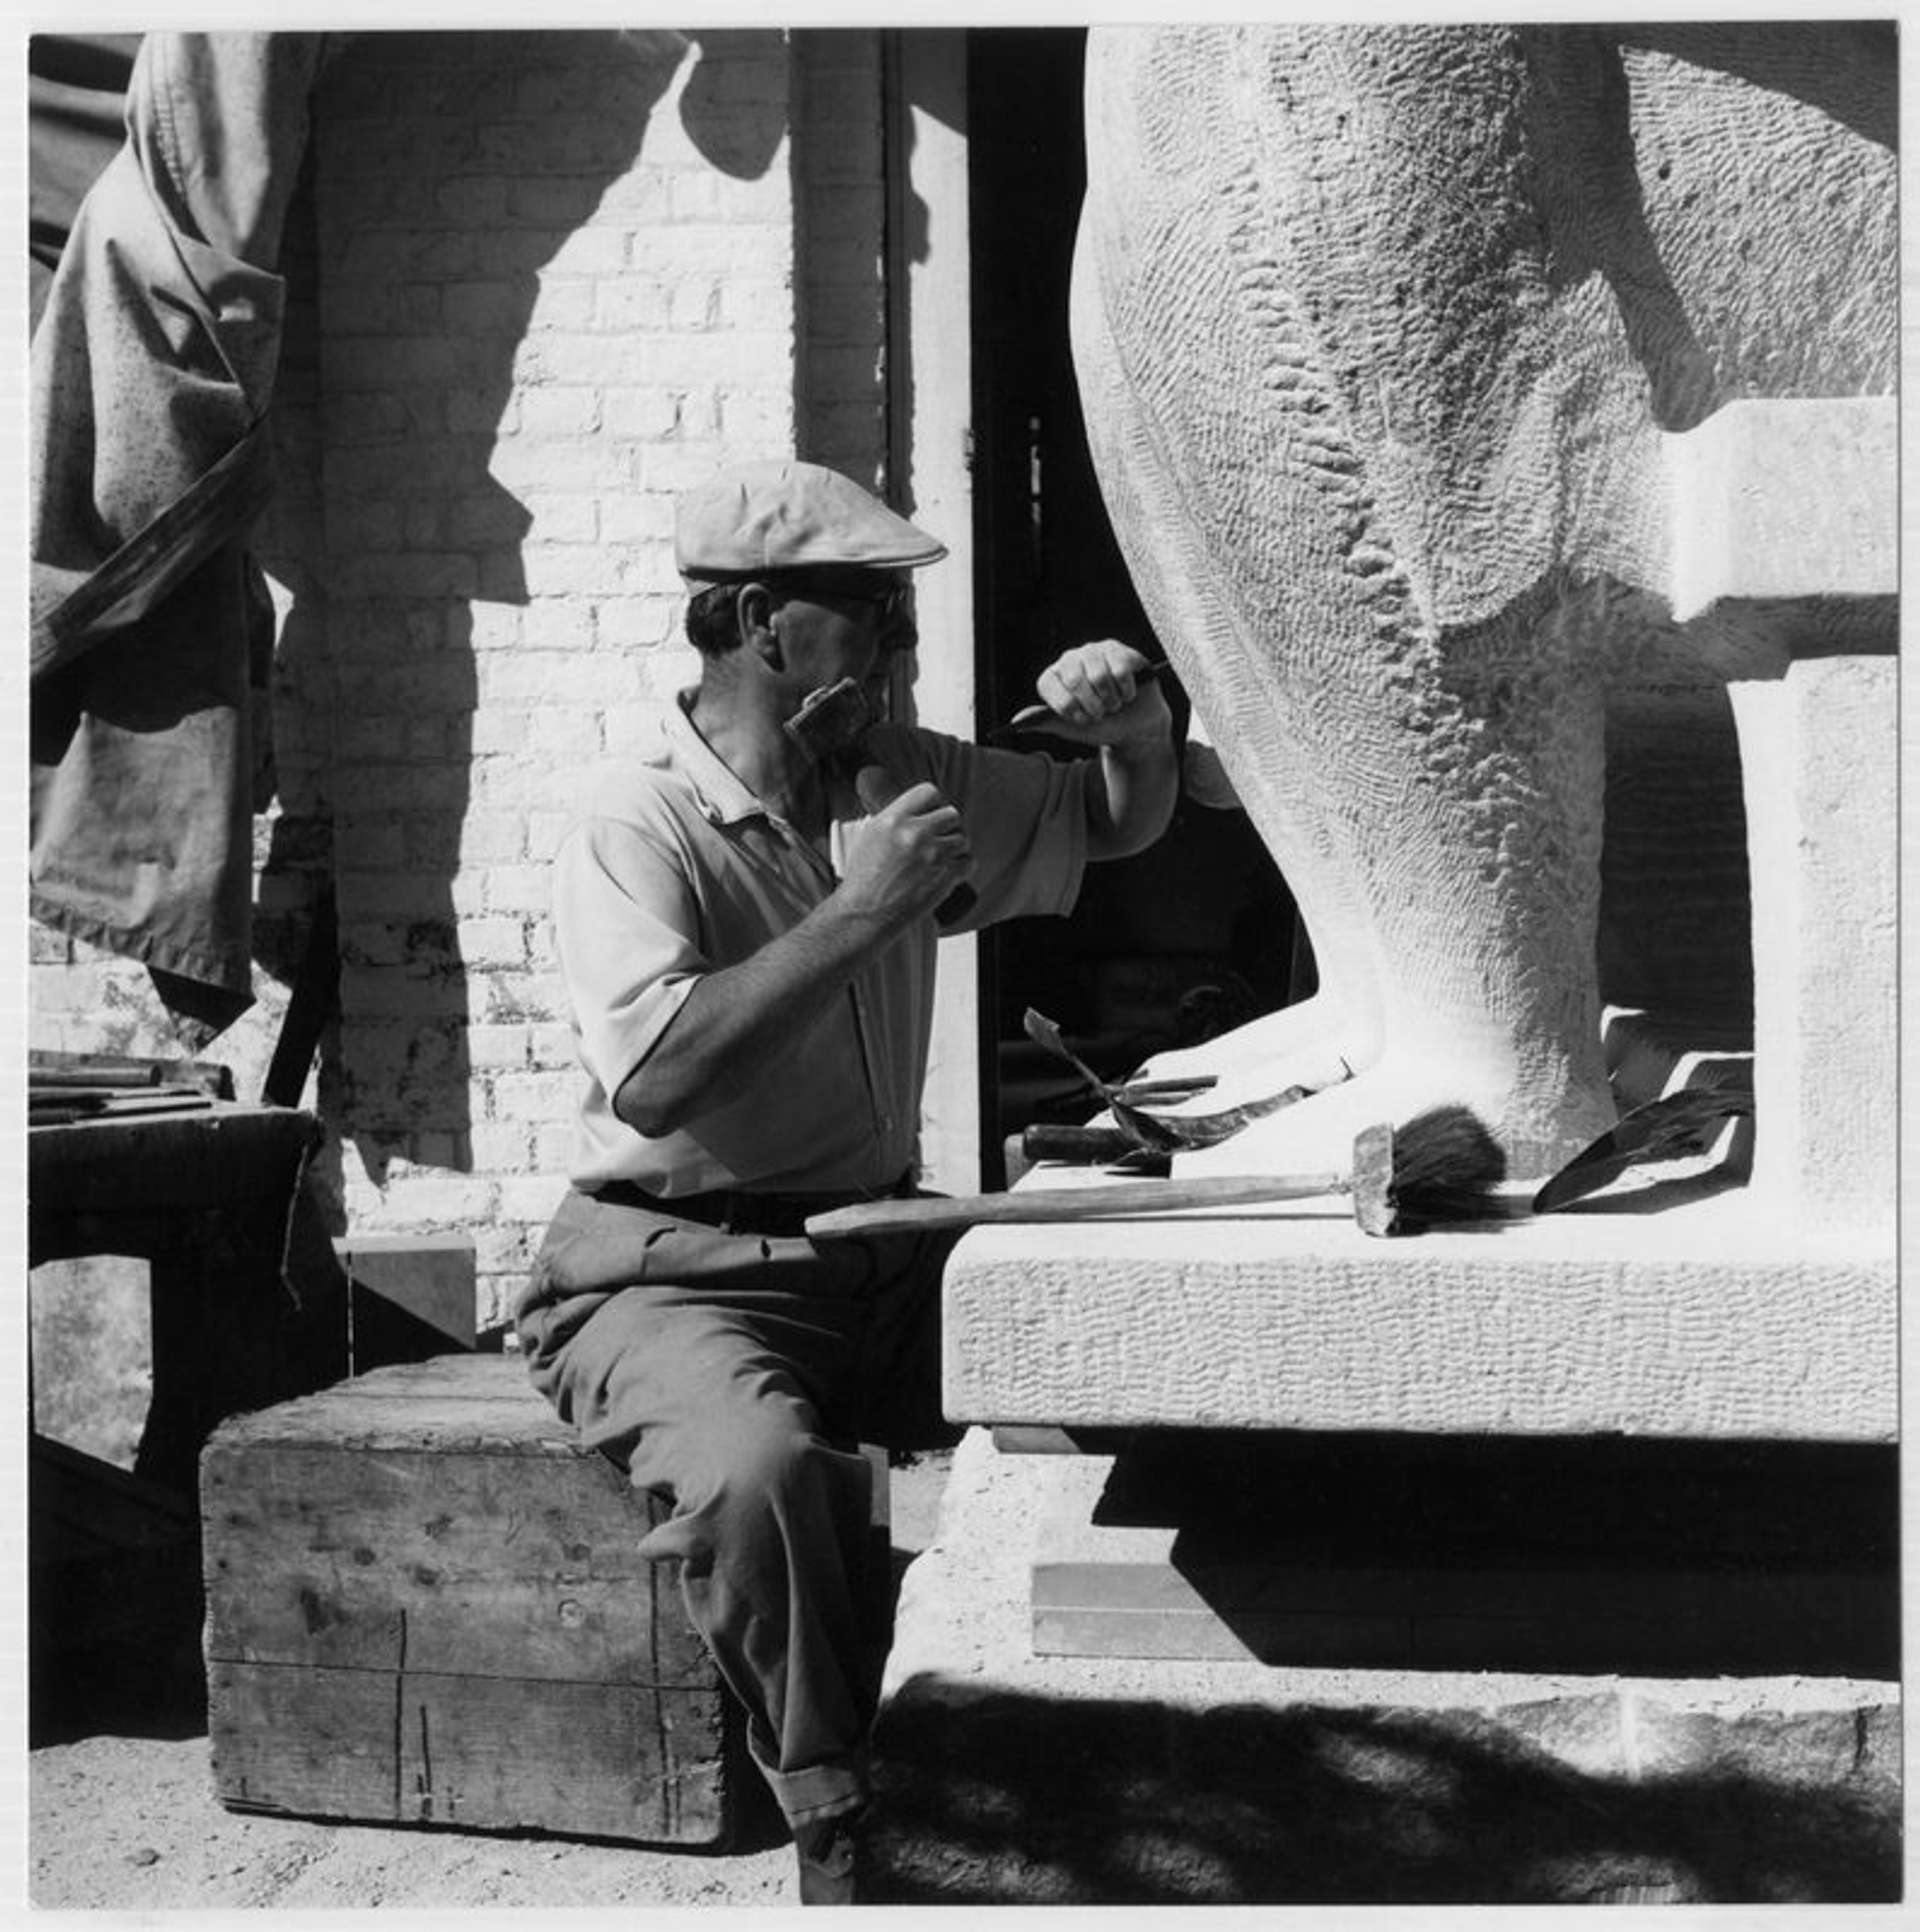 Black-and-white photograph of Henry Moore seated on a wooden plinth, wearing trousers, a white short-sleeve shirt, and a newsboy cap. Moore is seen carving at the foot of a large-scale sculpture, which extends beyond the frame of the photograph.